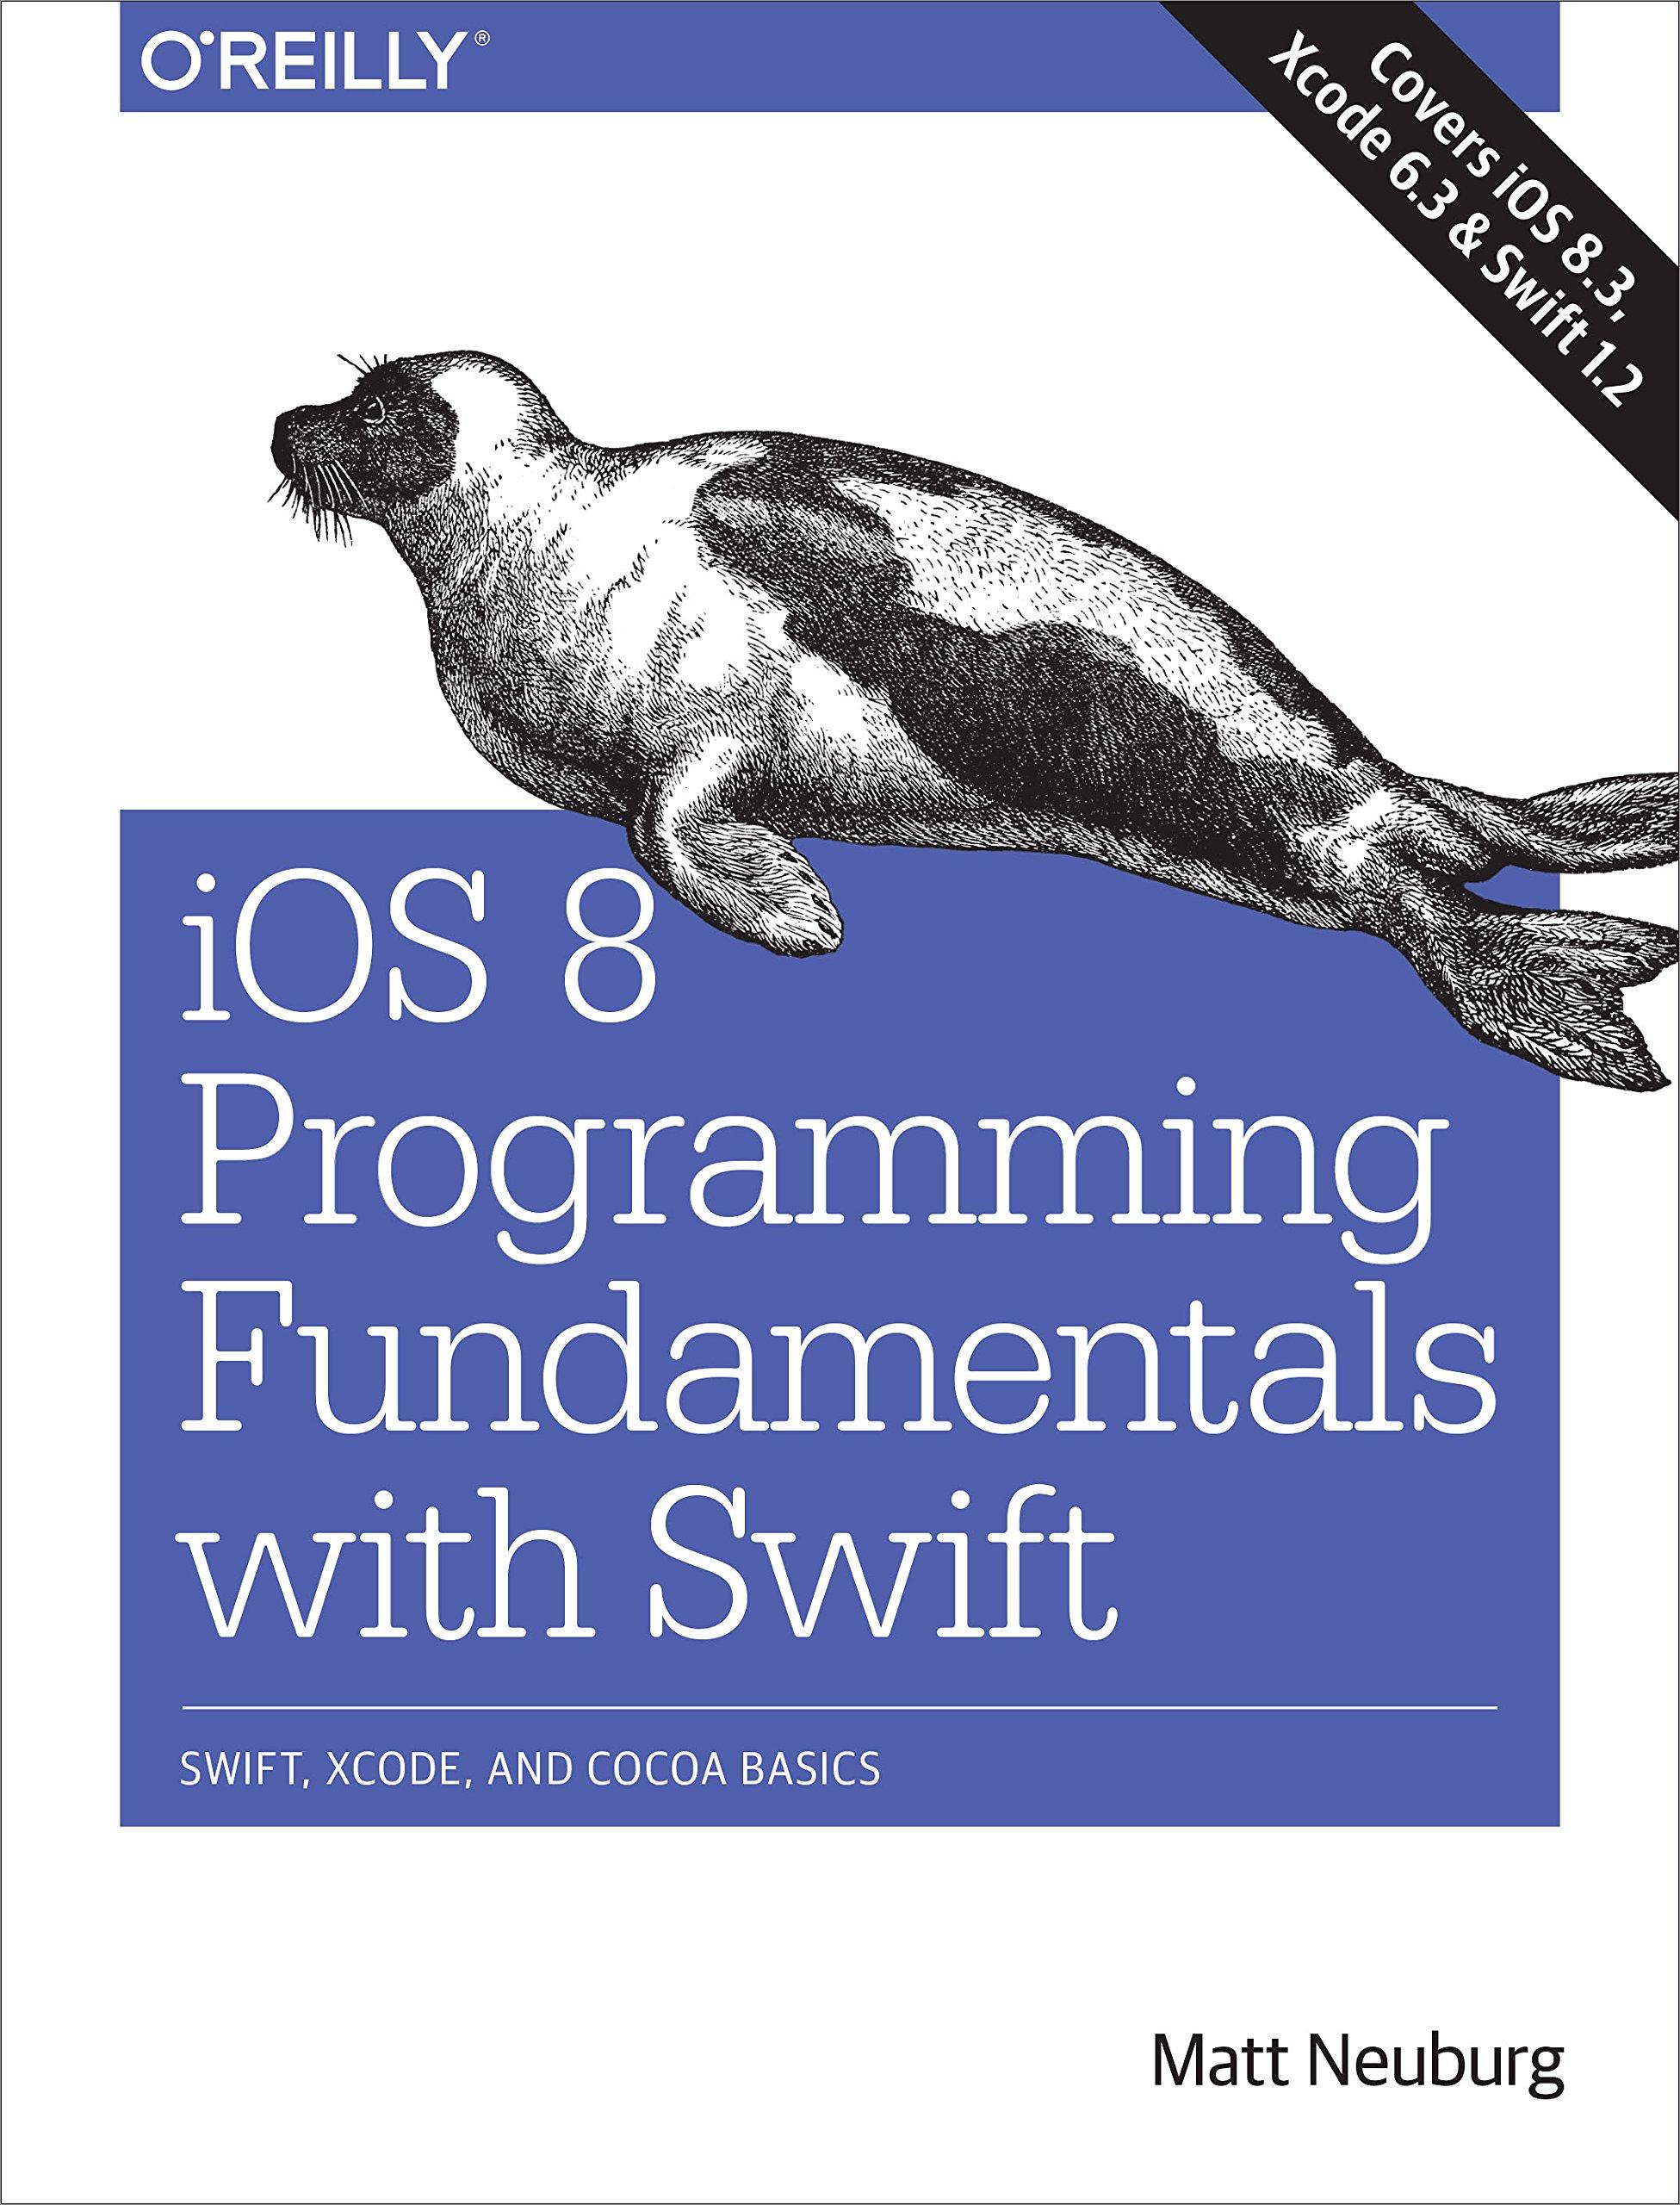 IOS 8 Programming Fundamentals With Swift Swift Xcode And Cocoa Basics